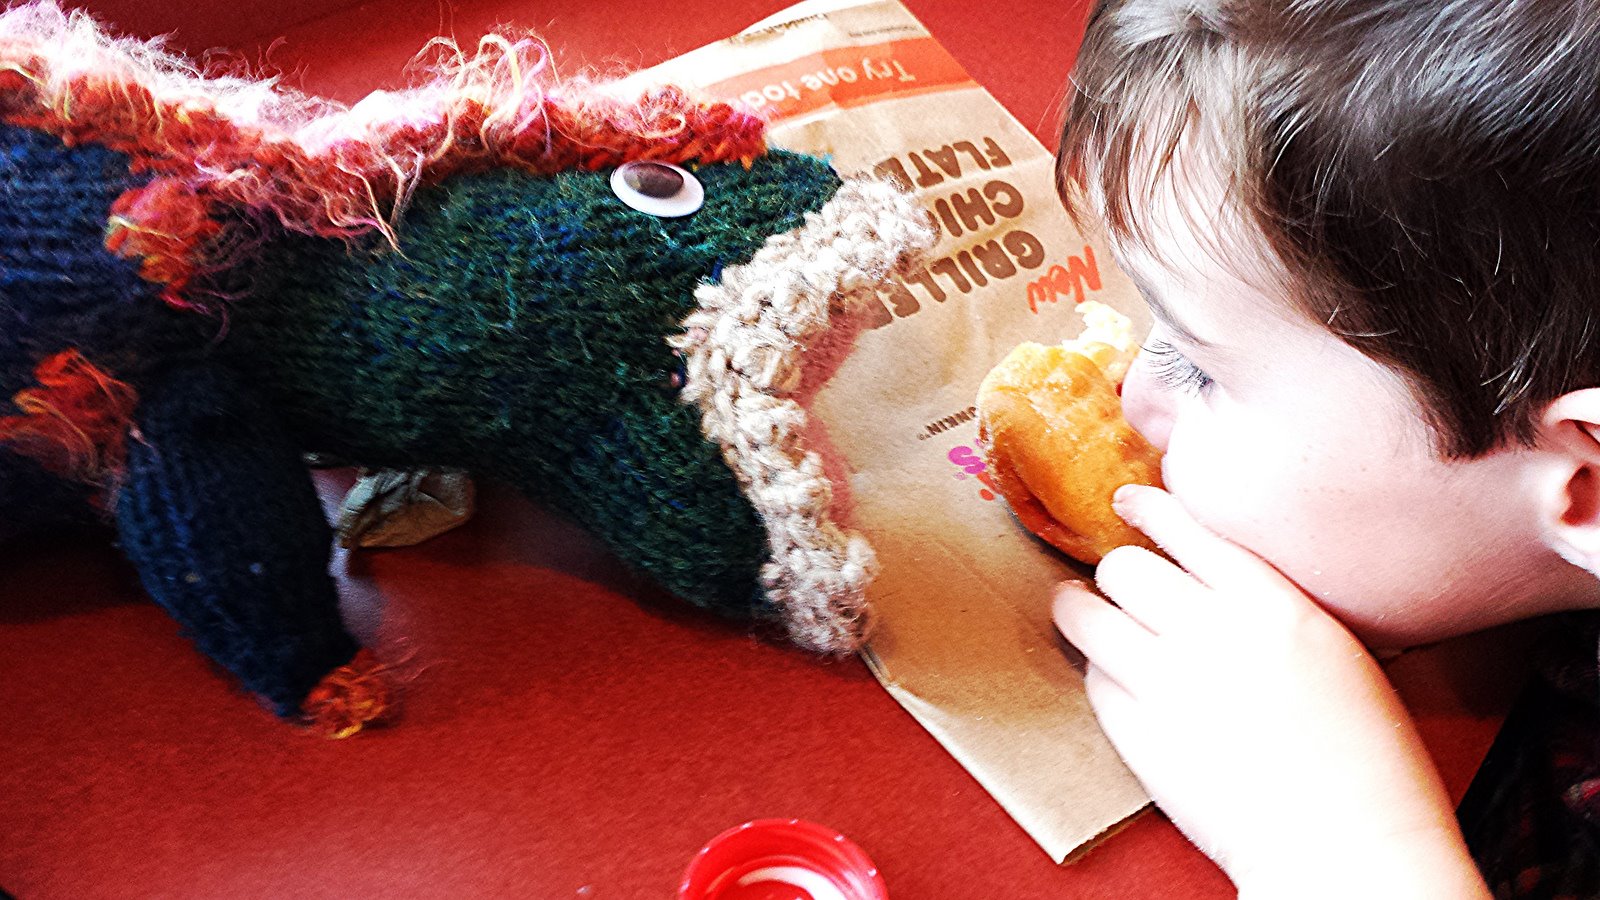 The boy and his toy T-rex eat a doughnut